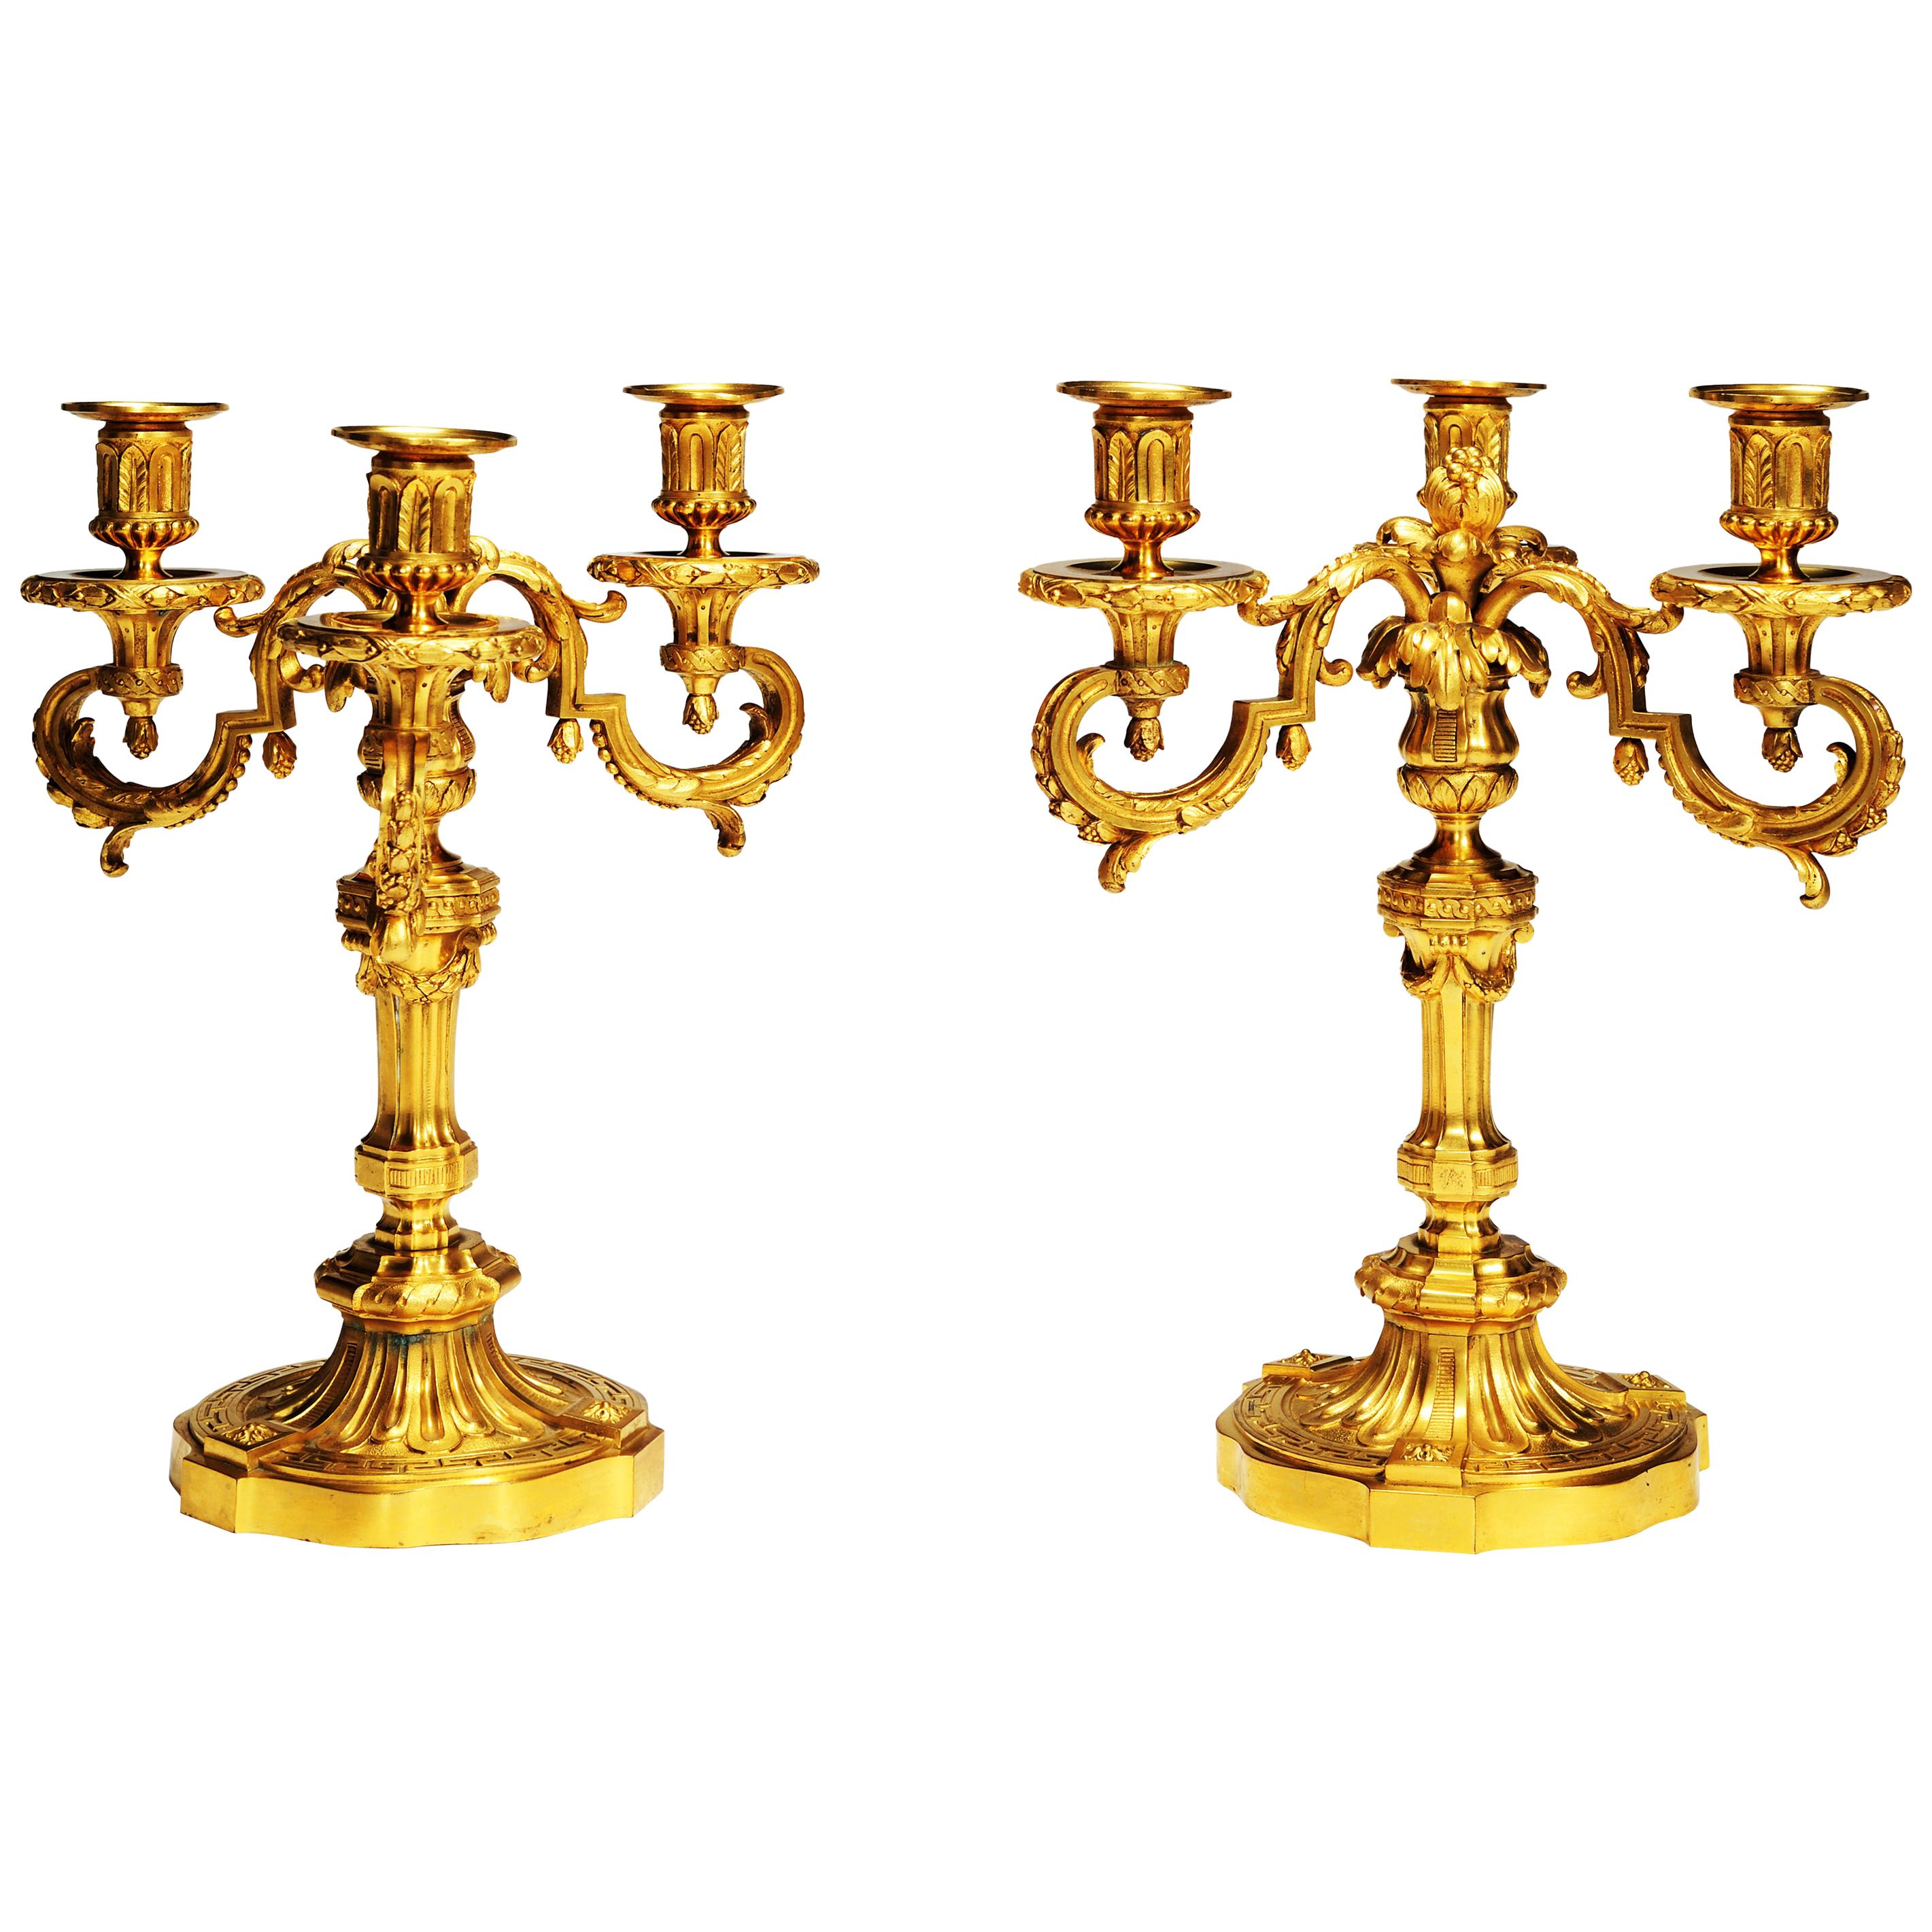 Pair of French Three-Flame Candelabra Candelabra, circa 1860 For Sale